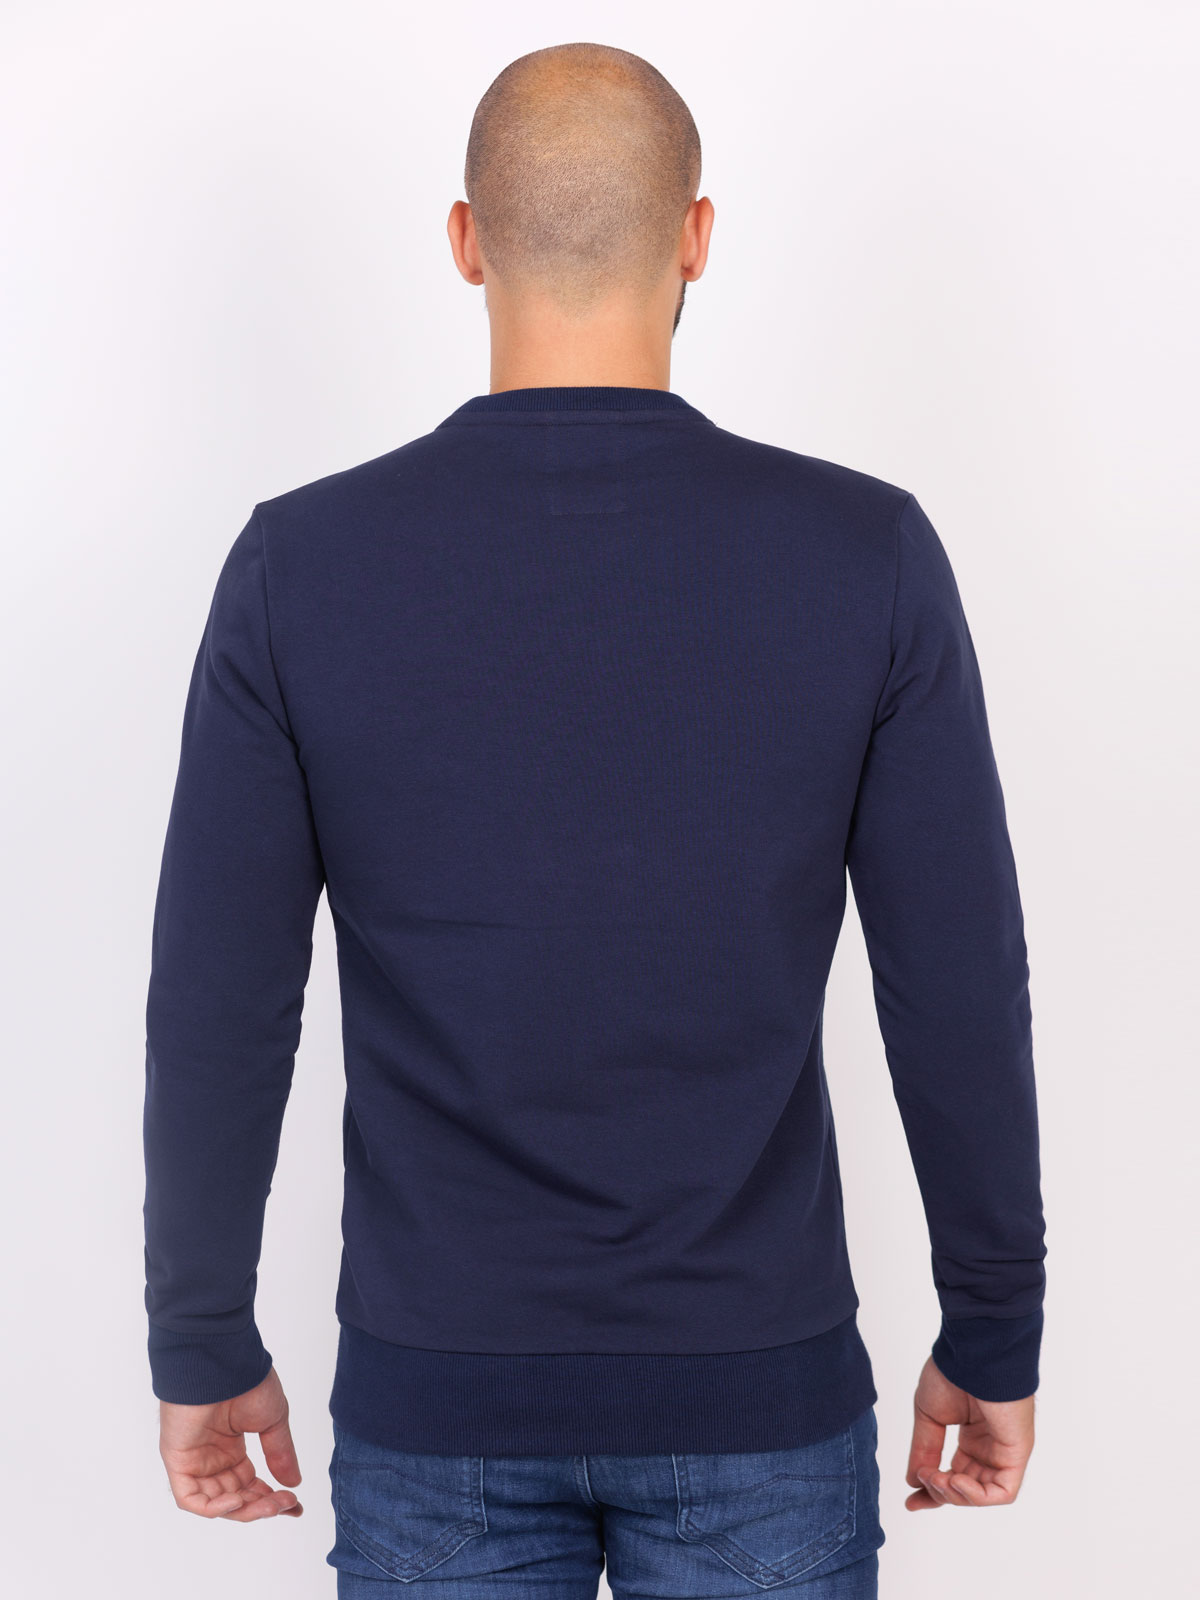 Blouse in dark blue with colored panels - 42353 € 29.81 img2